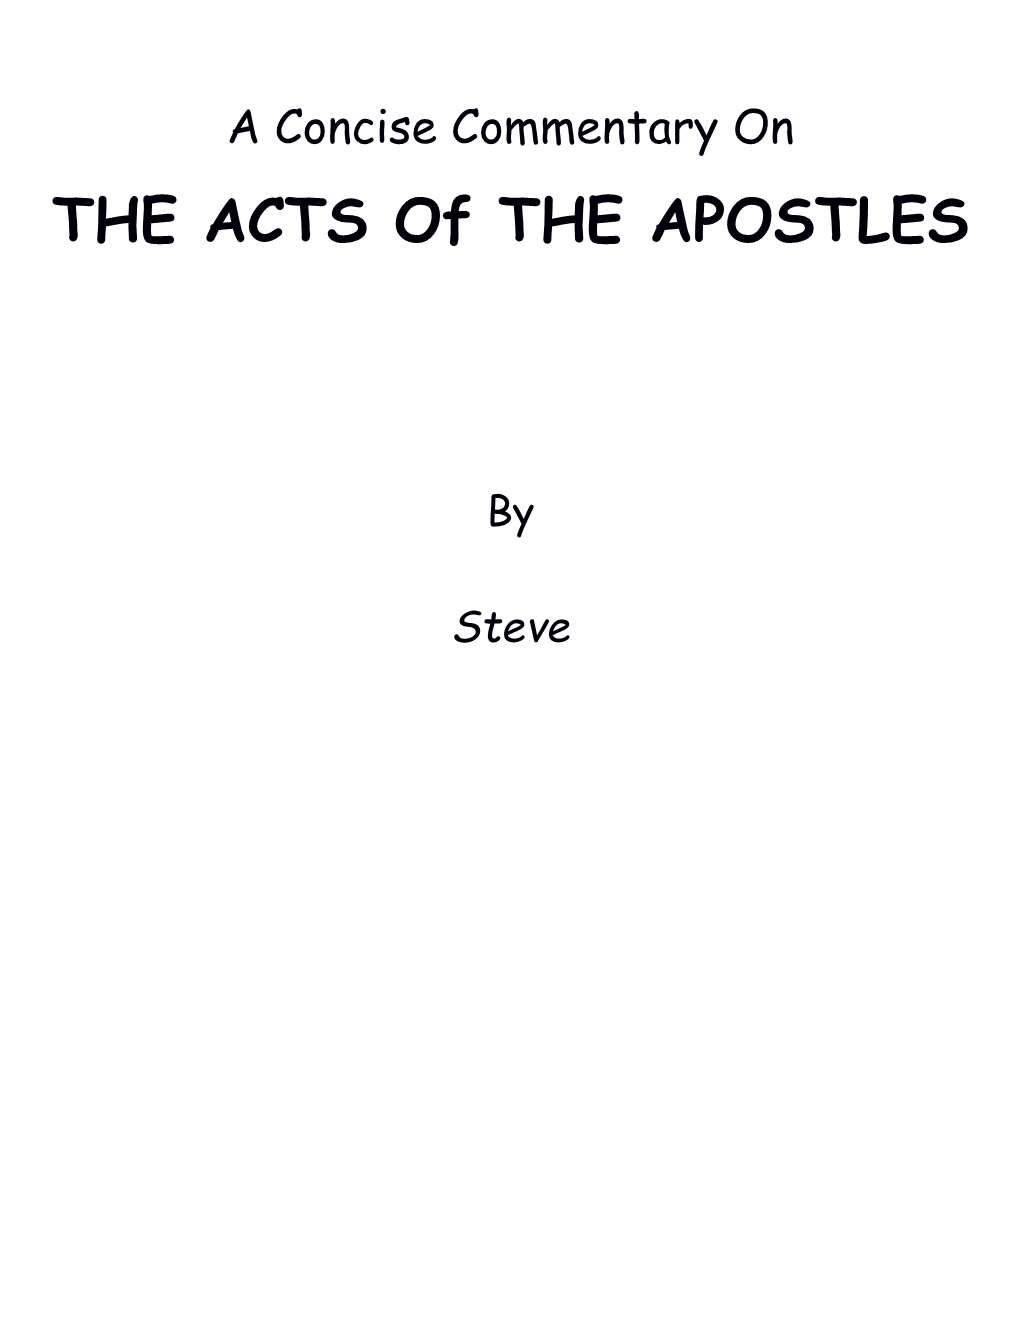 THE ACTS of the APOSTLES